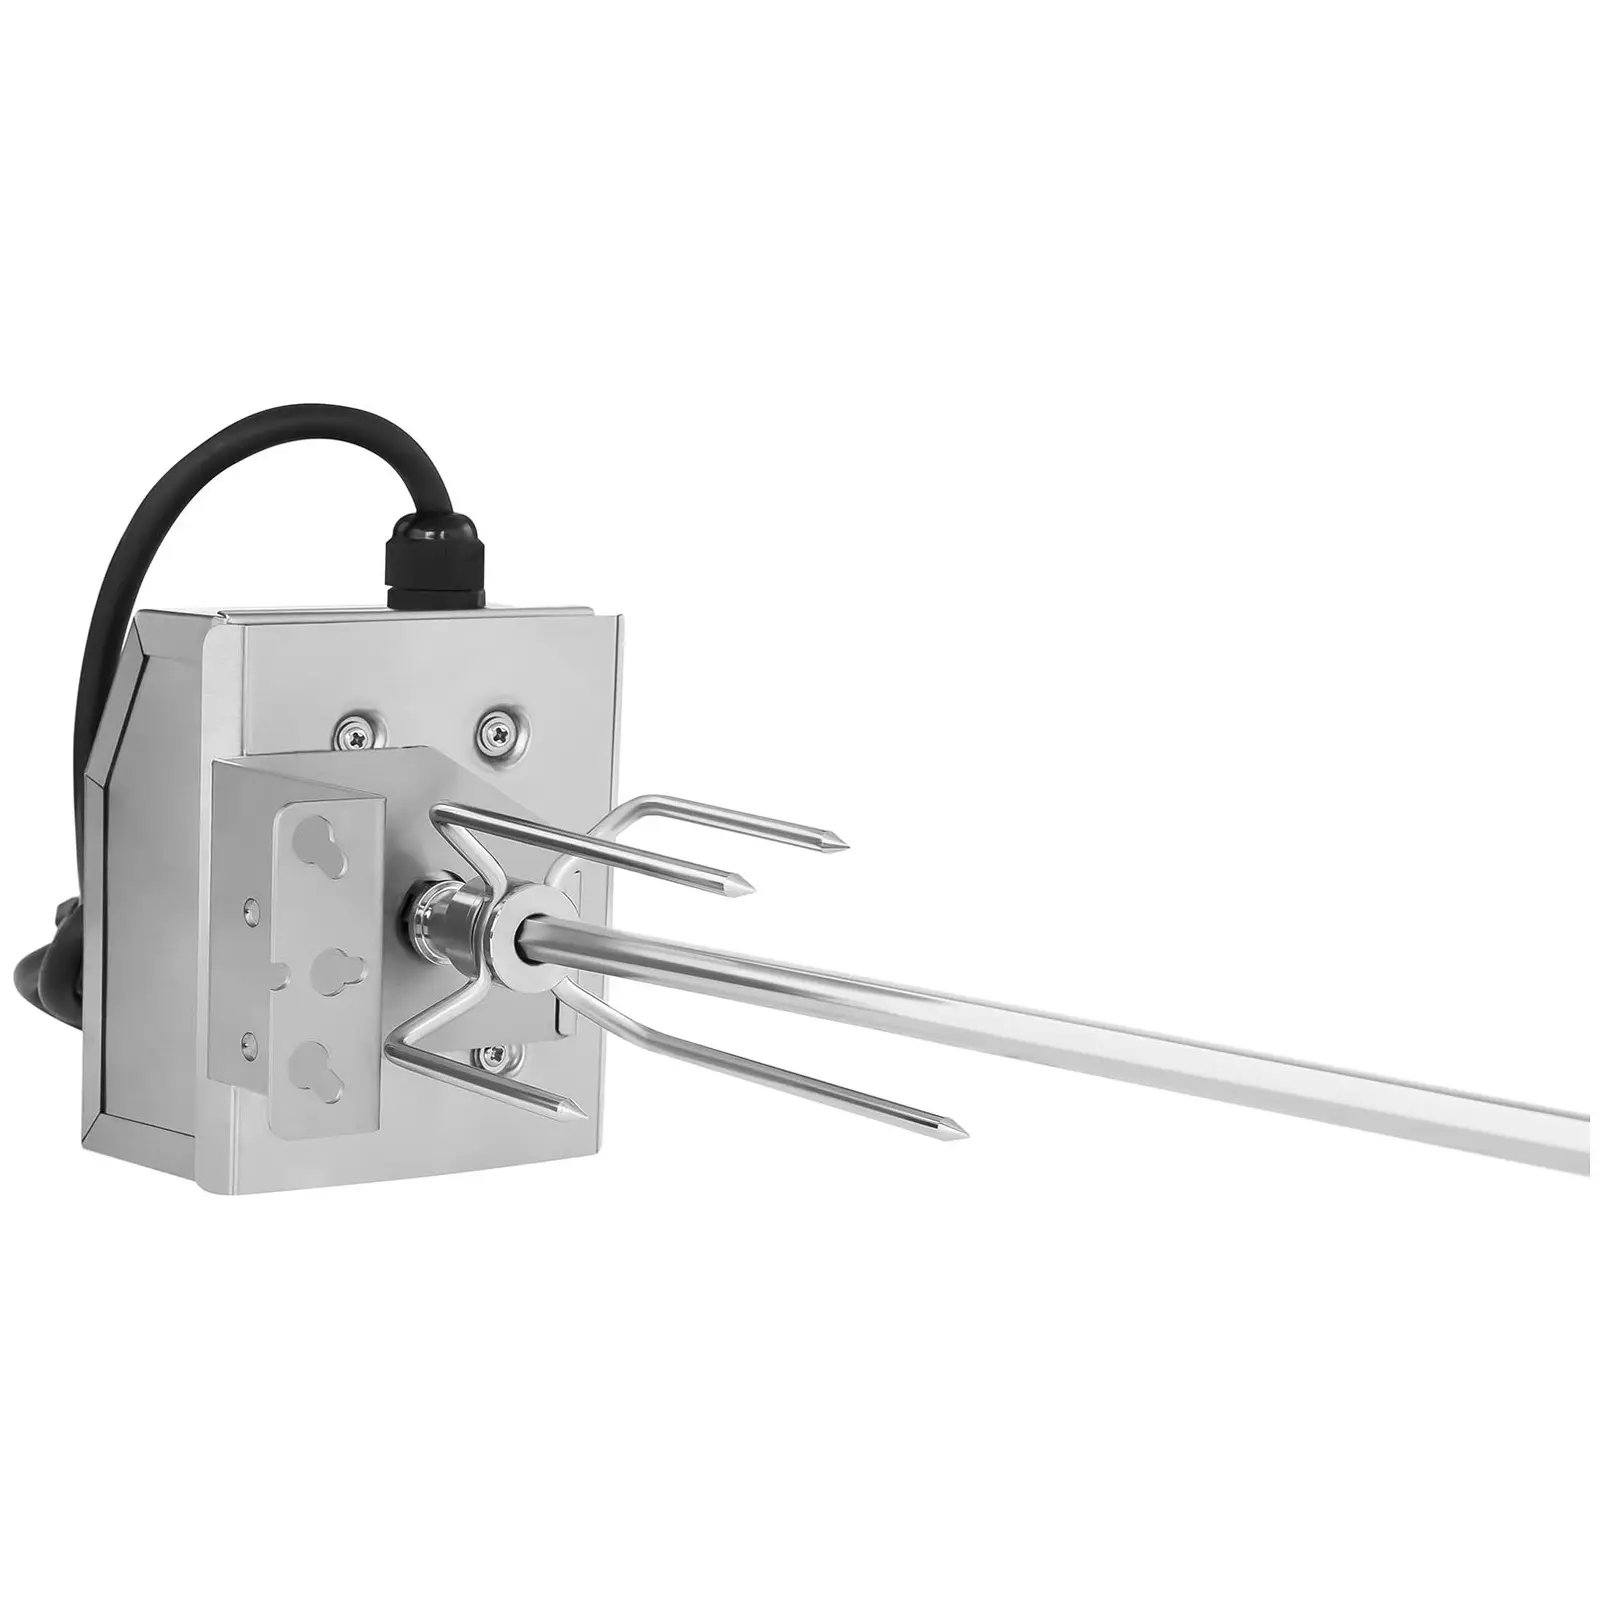 Rotisserie Spit with Motor - 140 cm